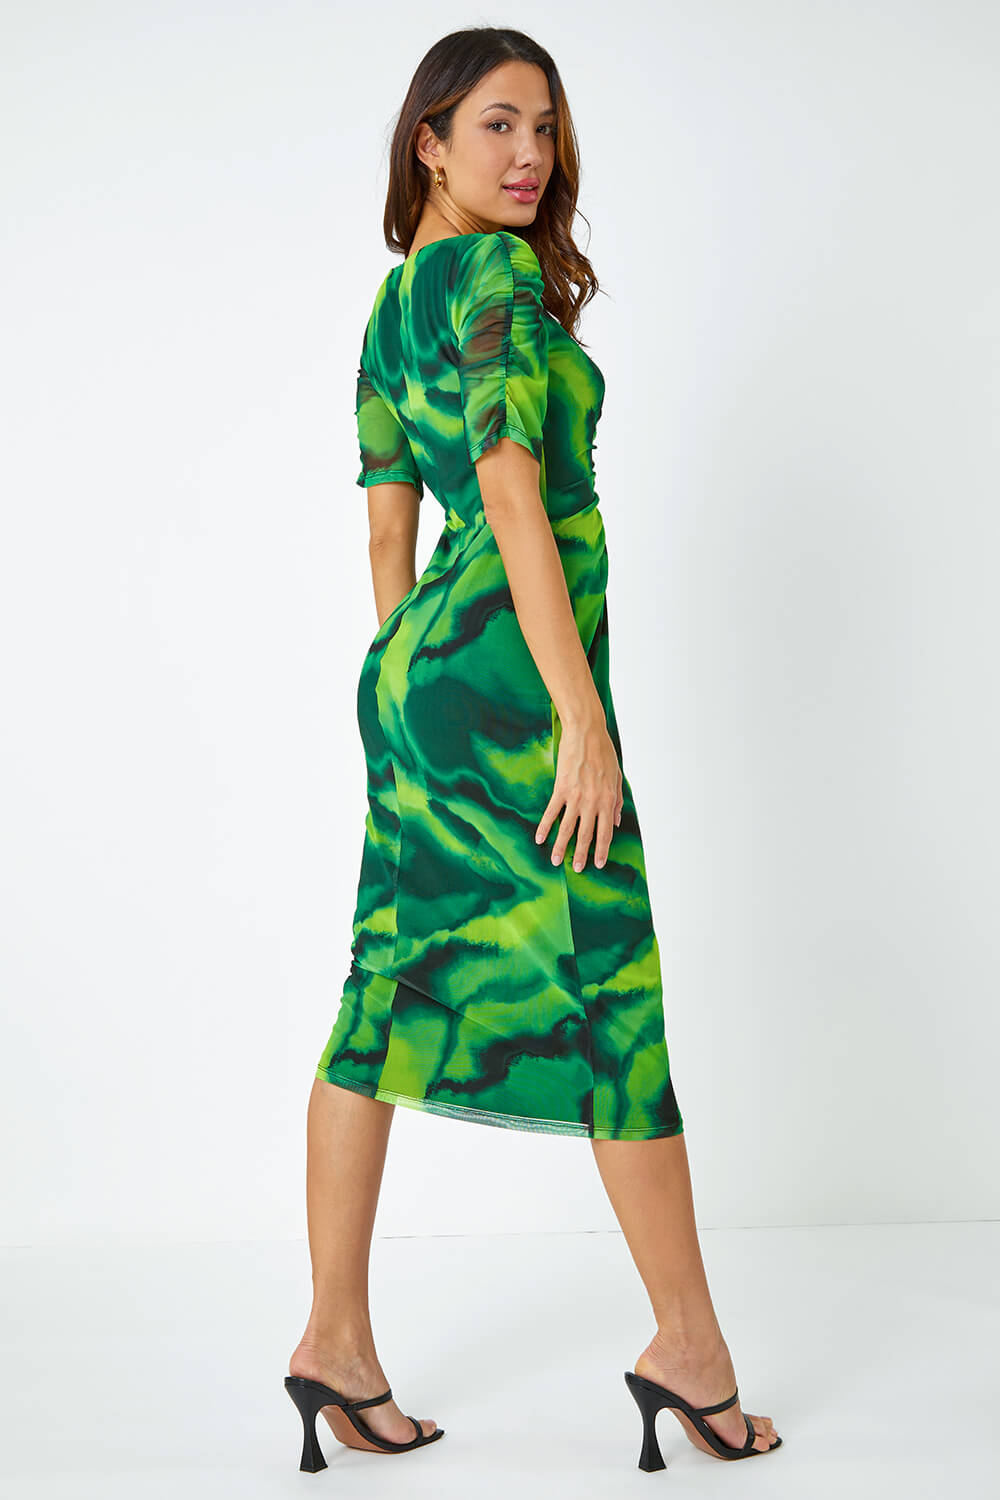 Green Marble Print Stretch Mesh Ruched Dress, Image 3 of 5